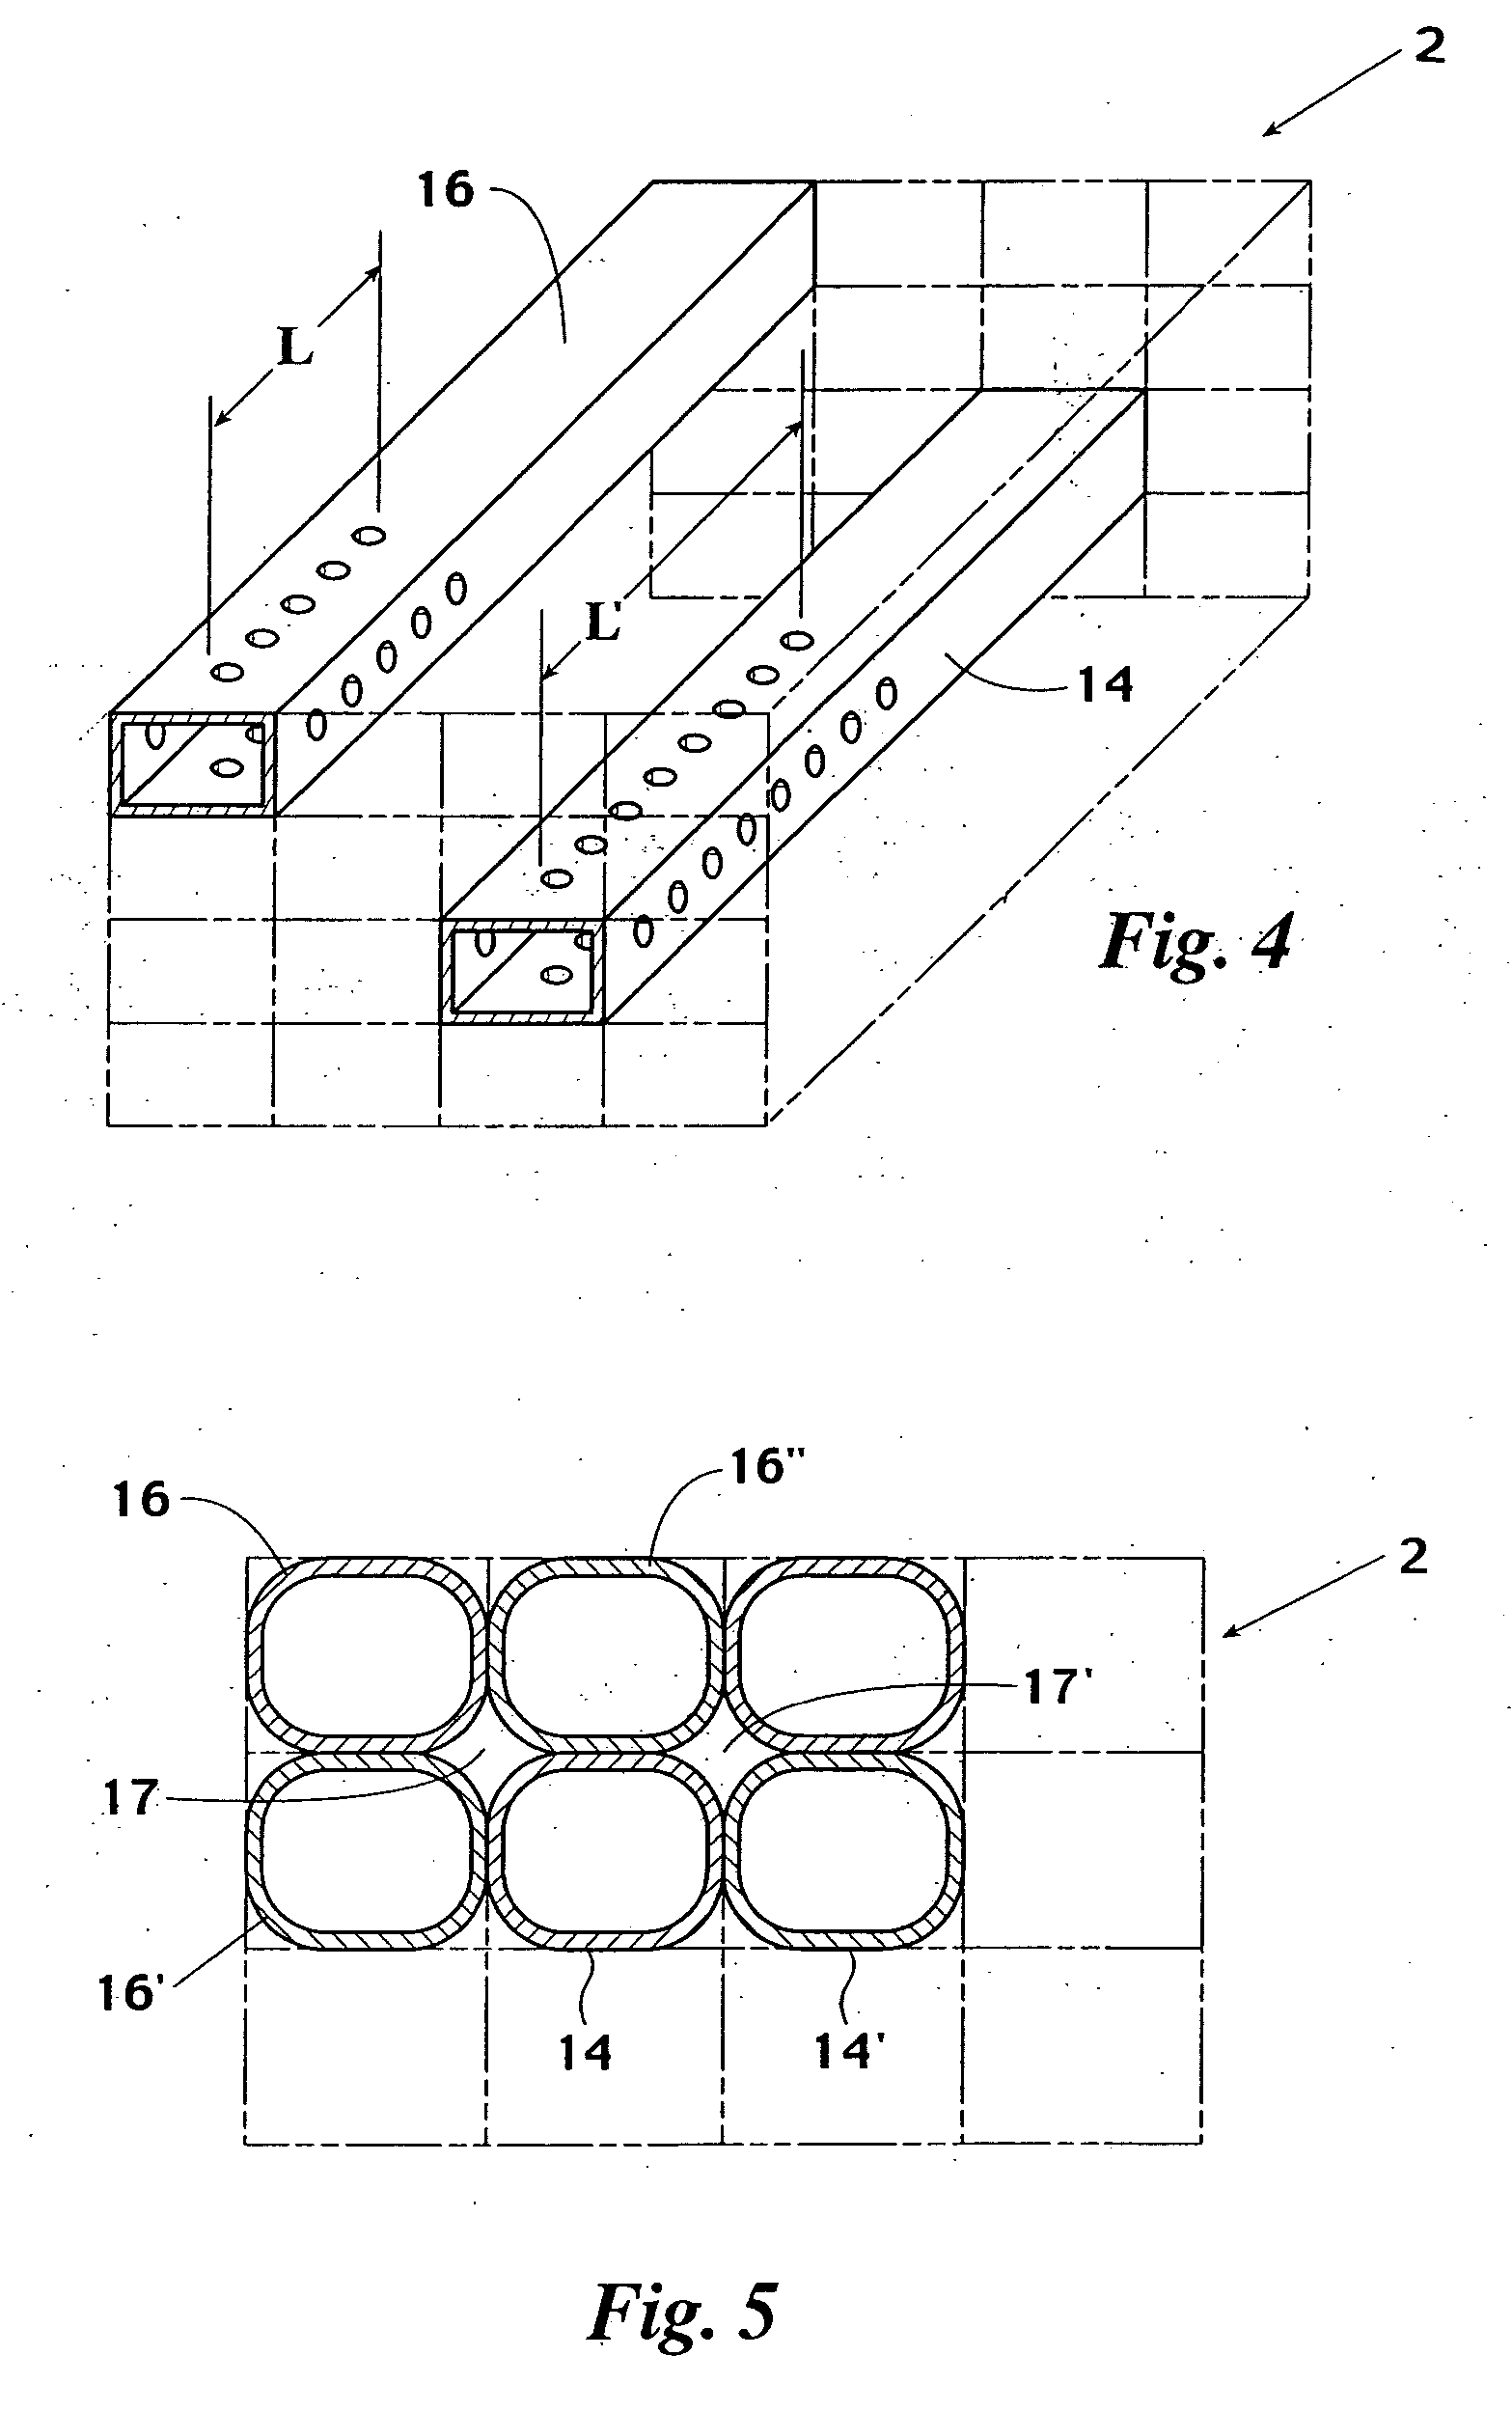 Structure and method for improving flow uniformity and reducing turbulence